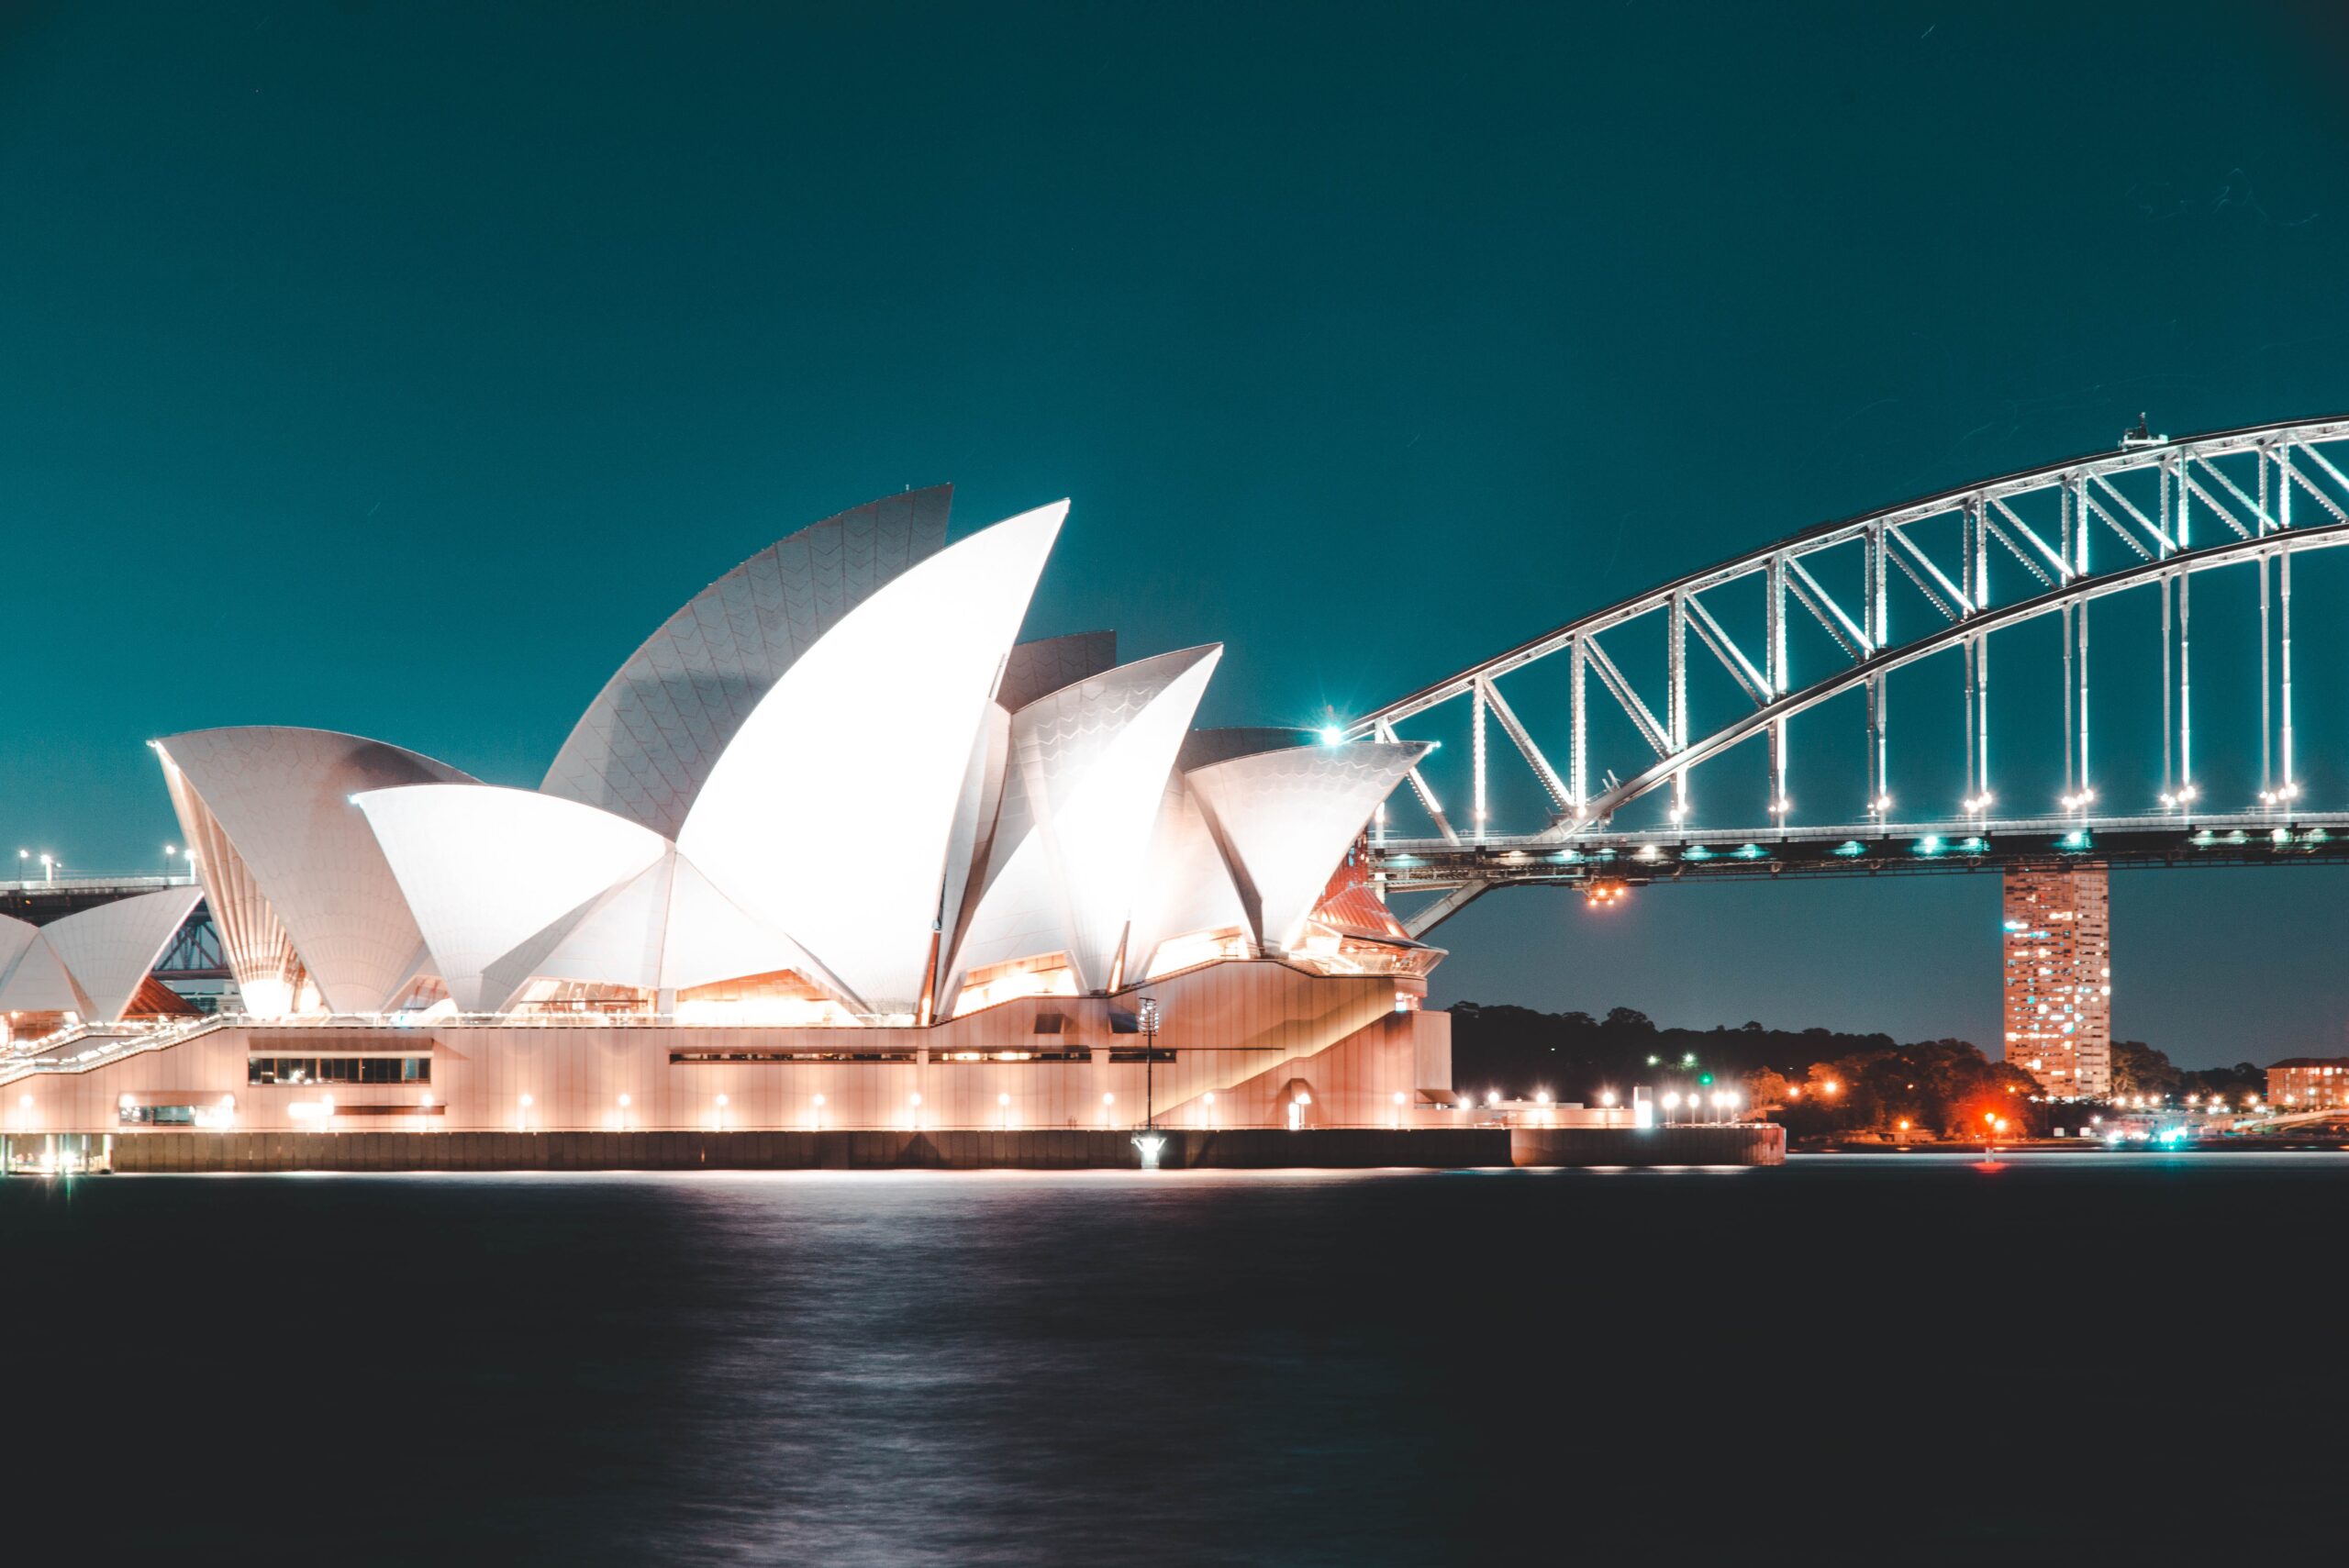 What makes Sydney so special?